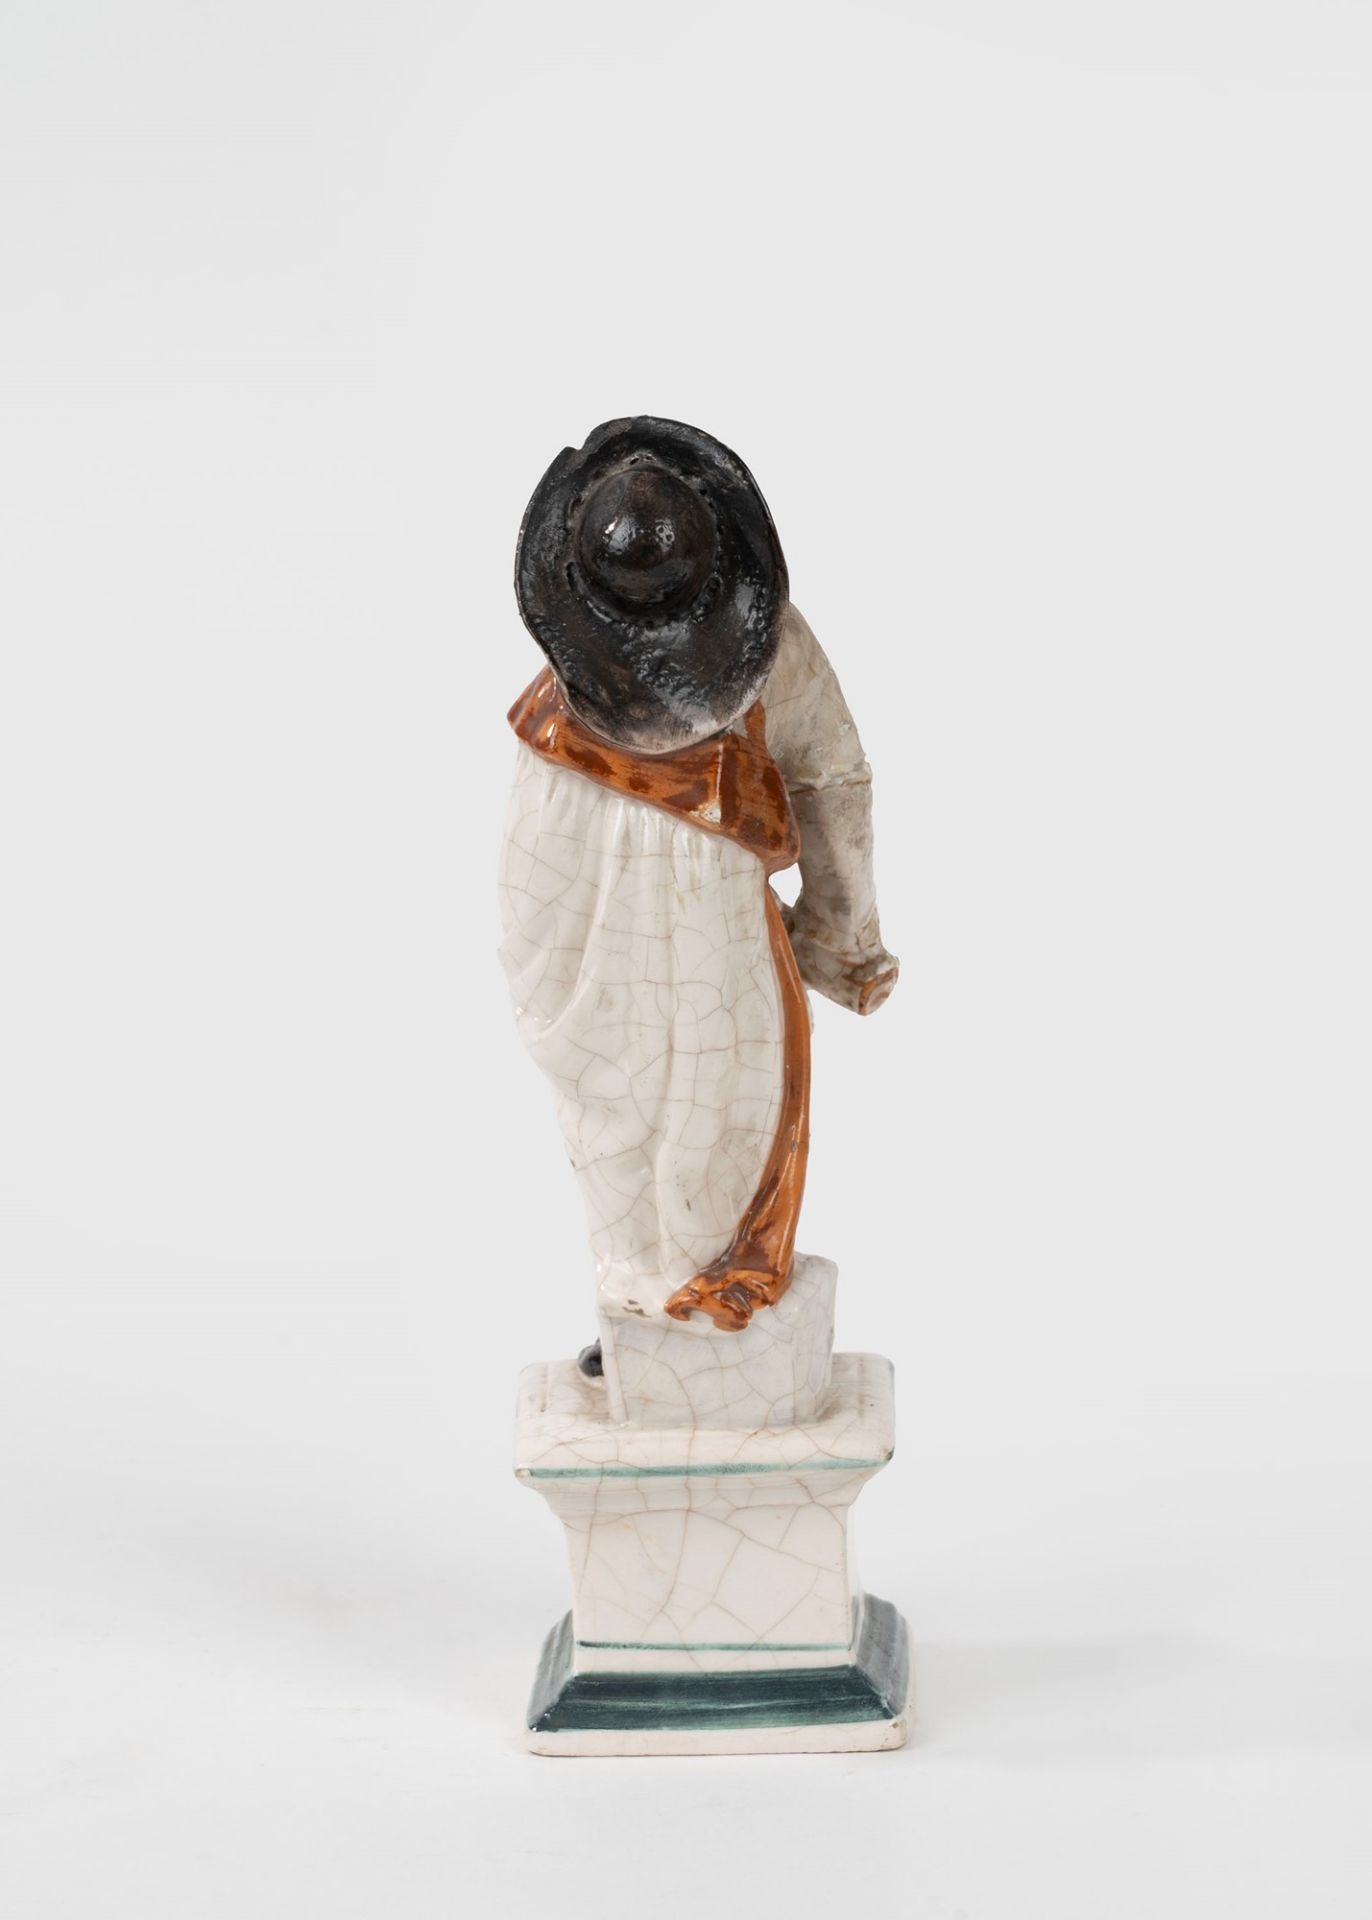 Polychrome earthenware sculpture depicting a Venetian mask, 19th century - Image 2 of 3